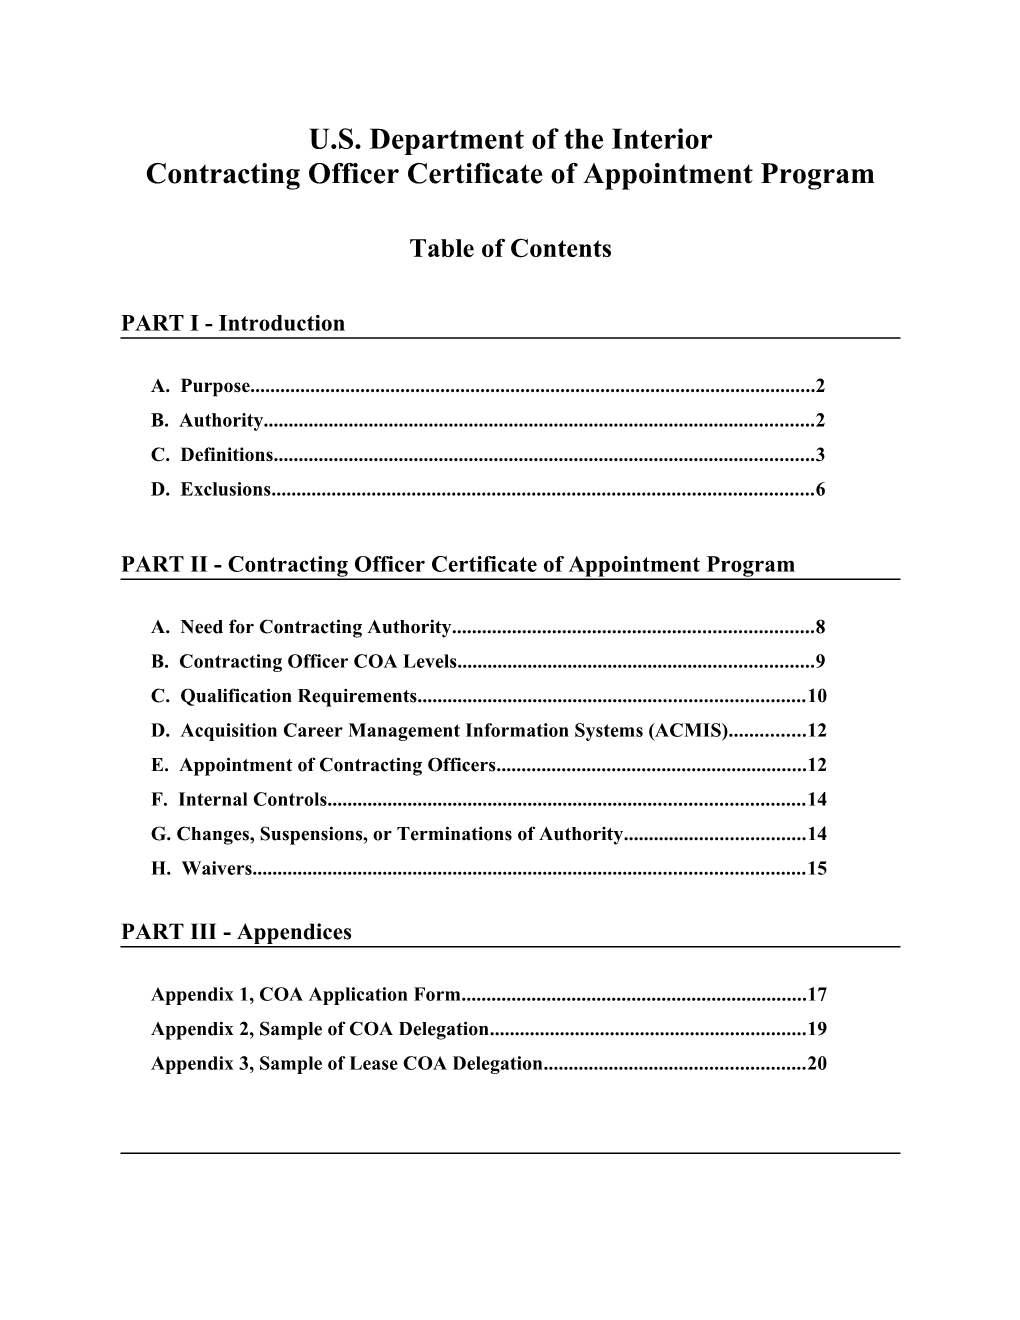 Contracting Officer Certificate of Appointment Program